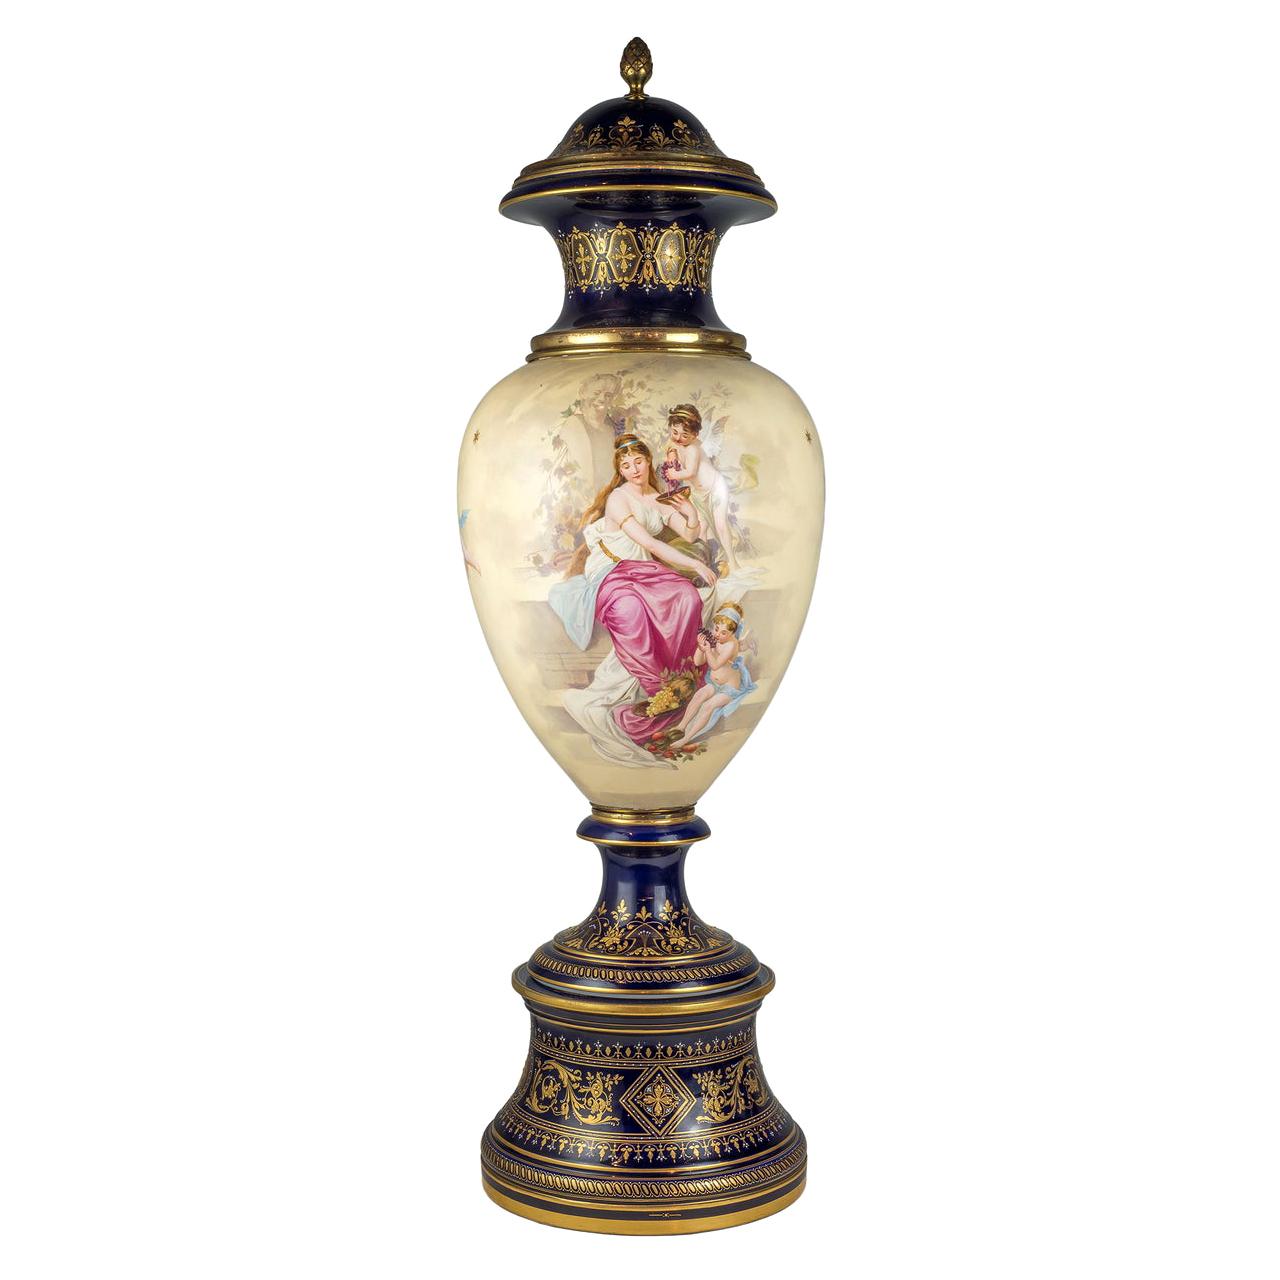 Stunning Large Royal Vienna-Style Painted Porcelain Covered Urns For Sale